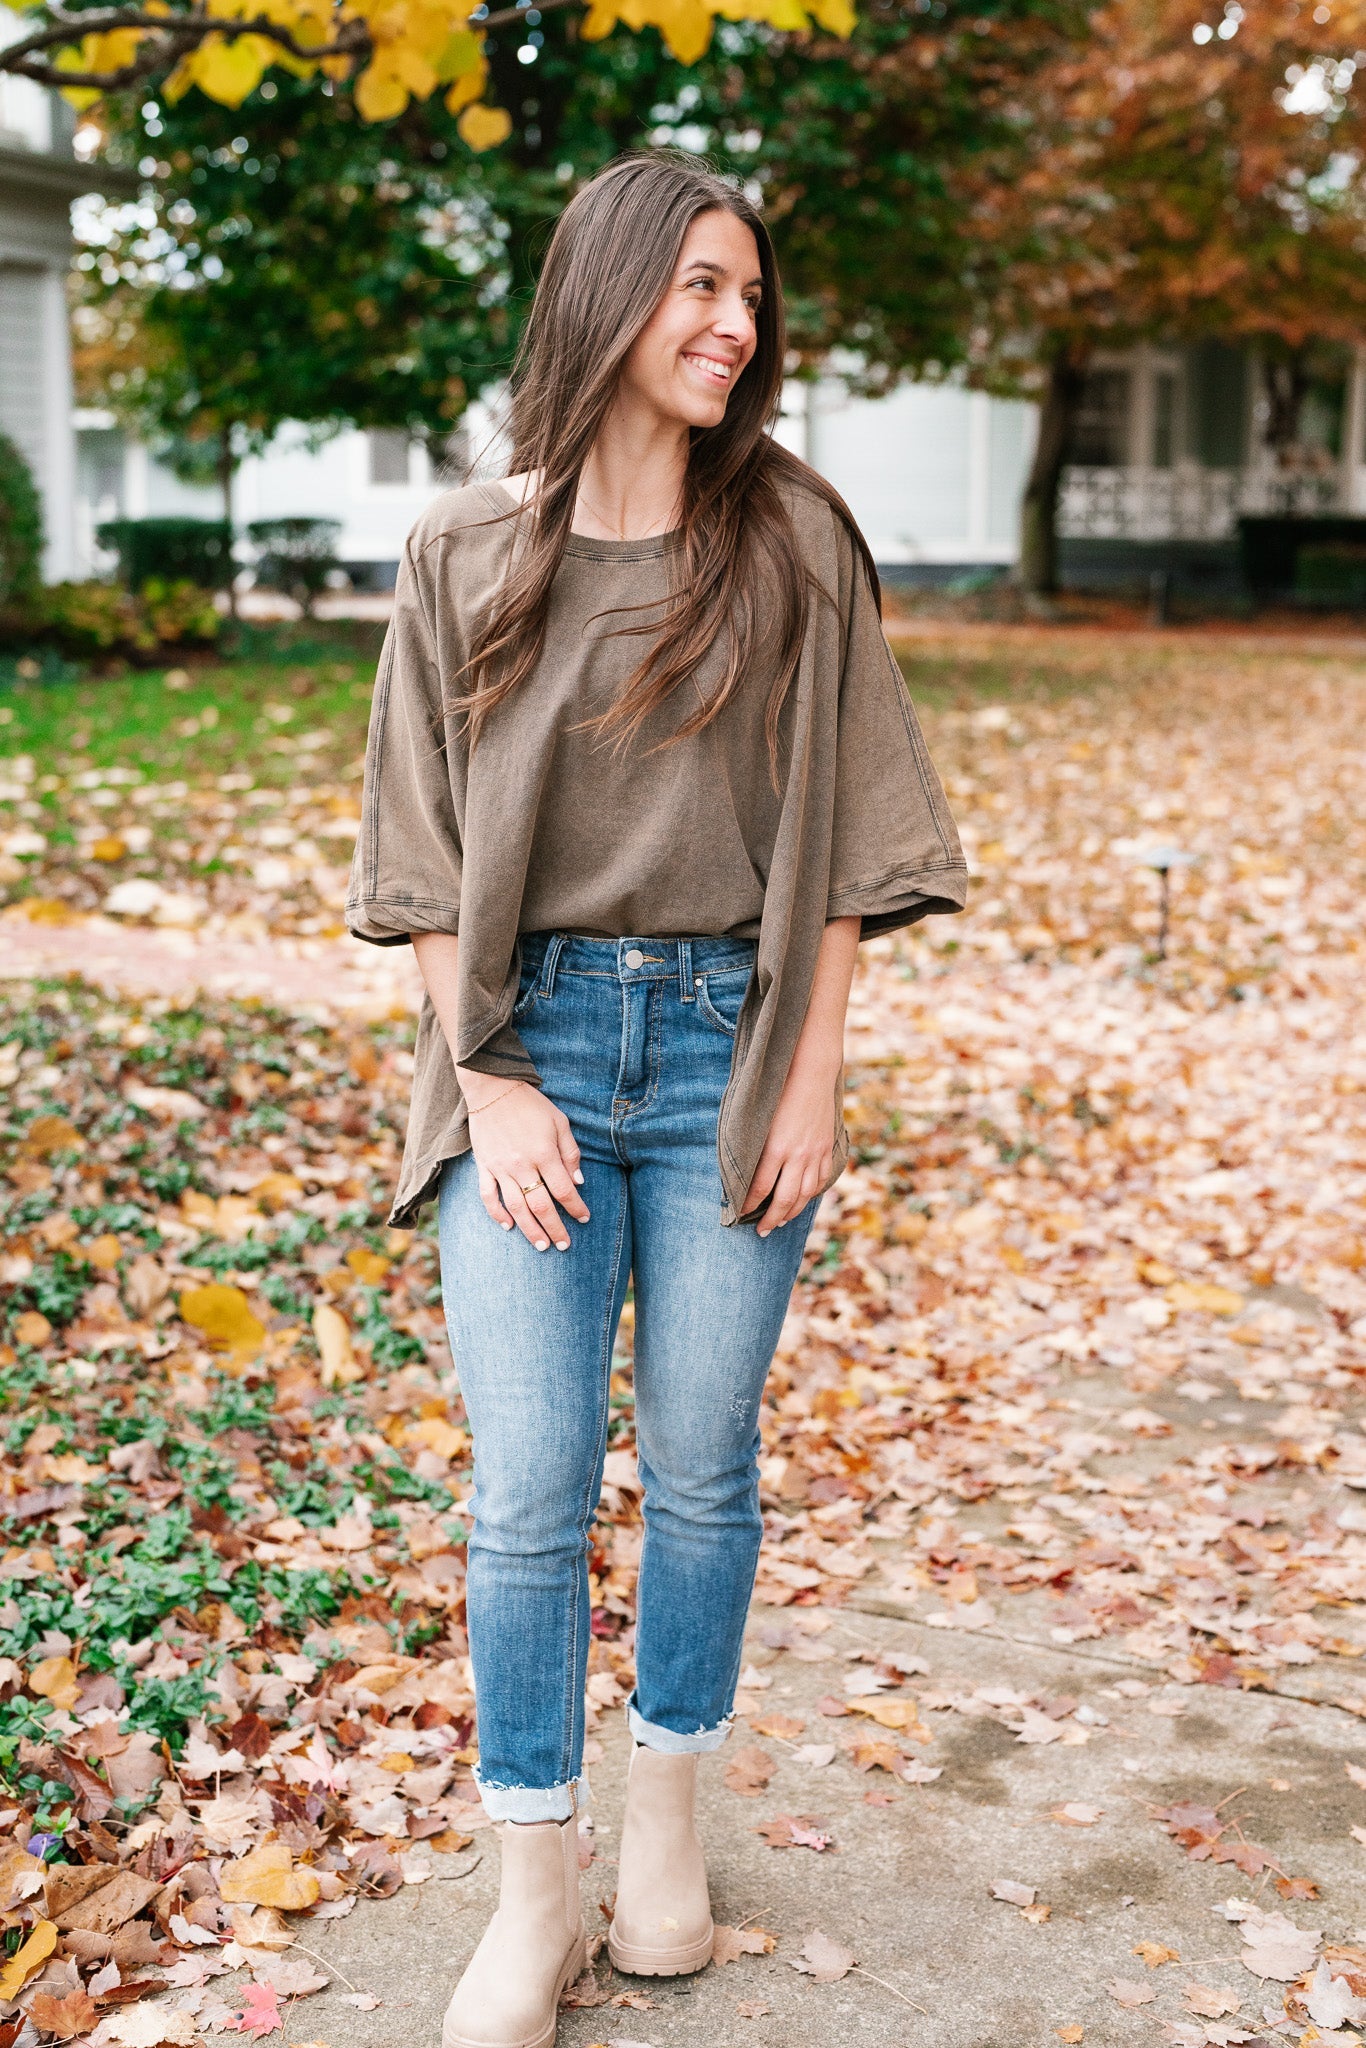 Stone Mineral Wash Loose Fit Top